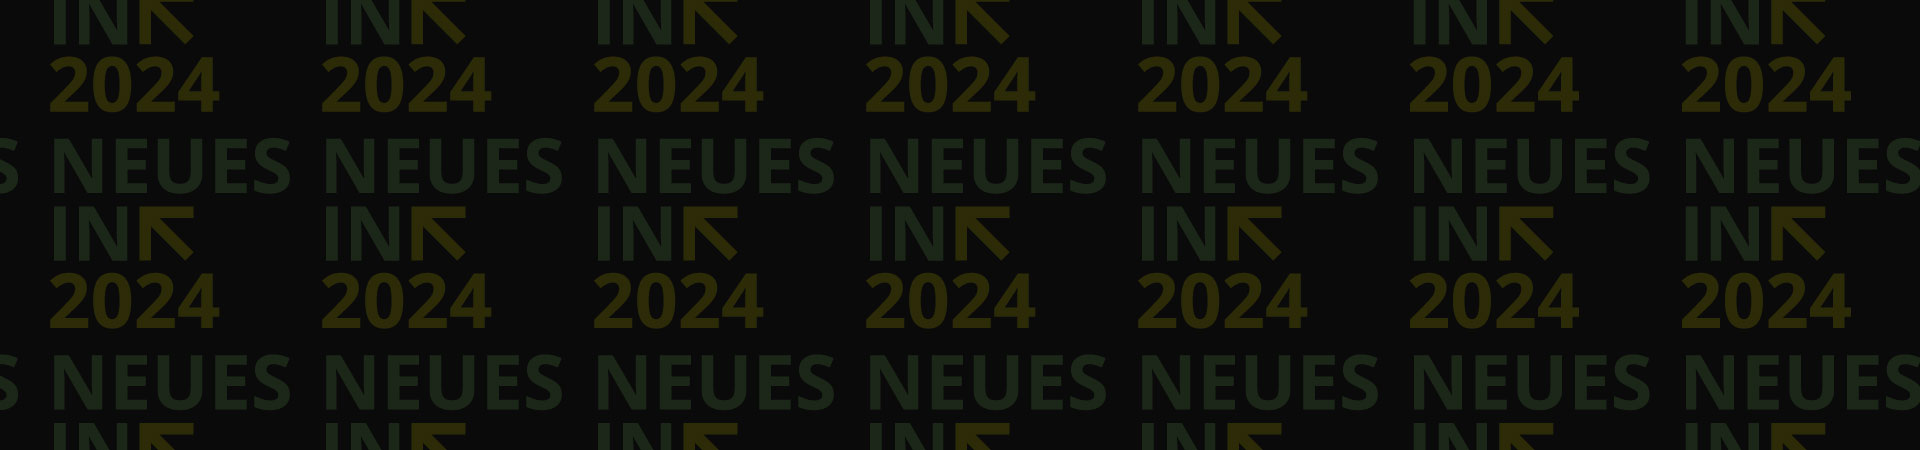 Neues In 2024